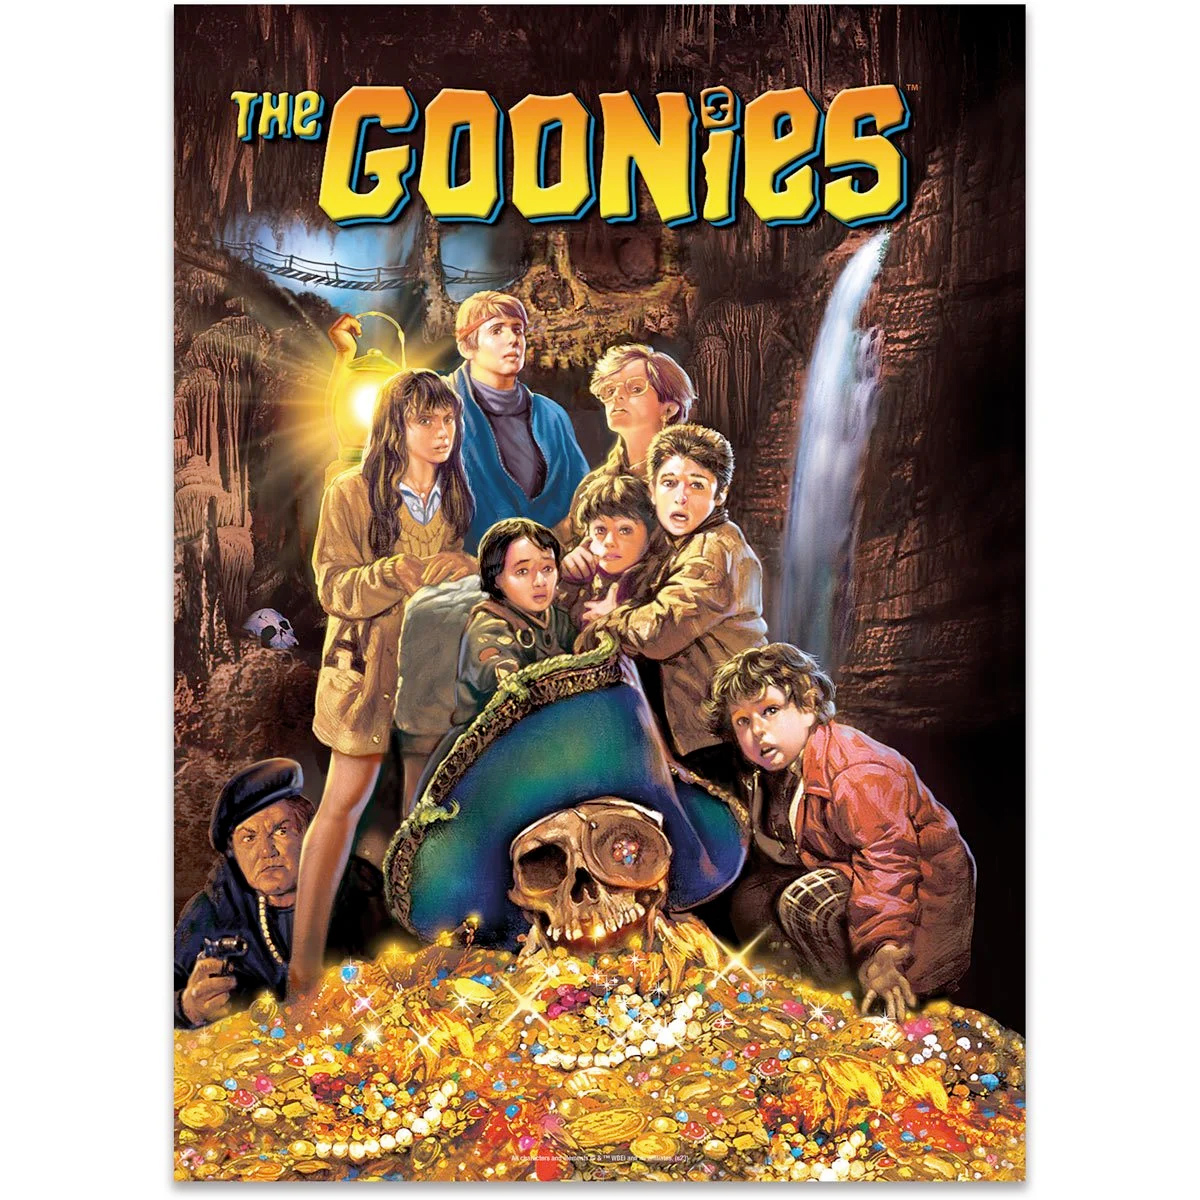 The Goonies Vuzzle Puzzle in VHS Box with 300 Pieces